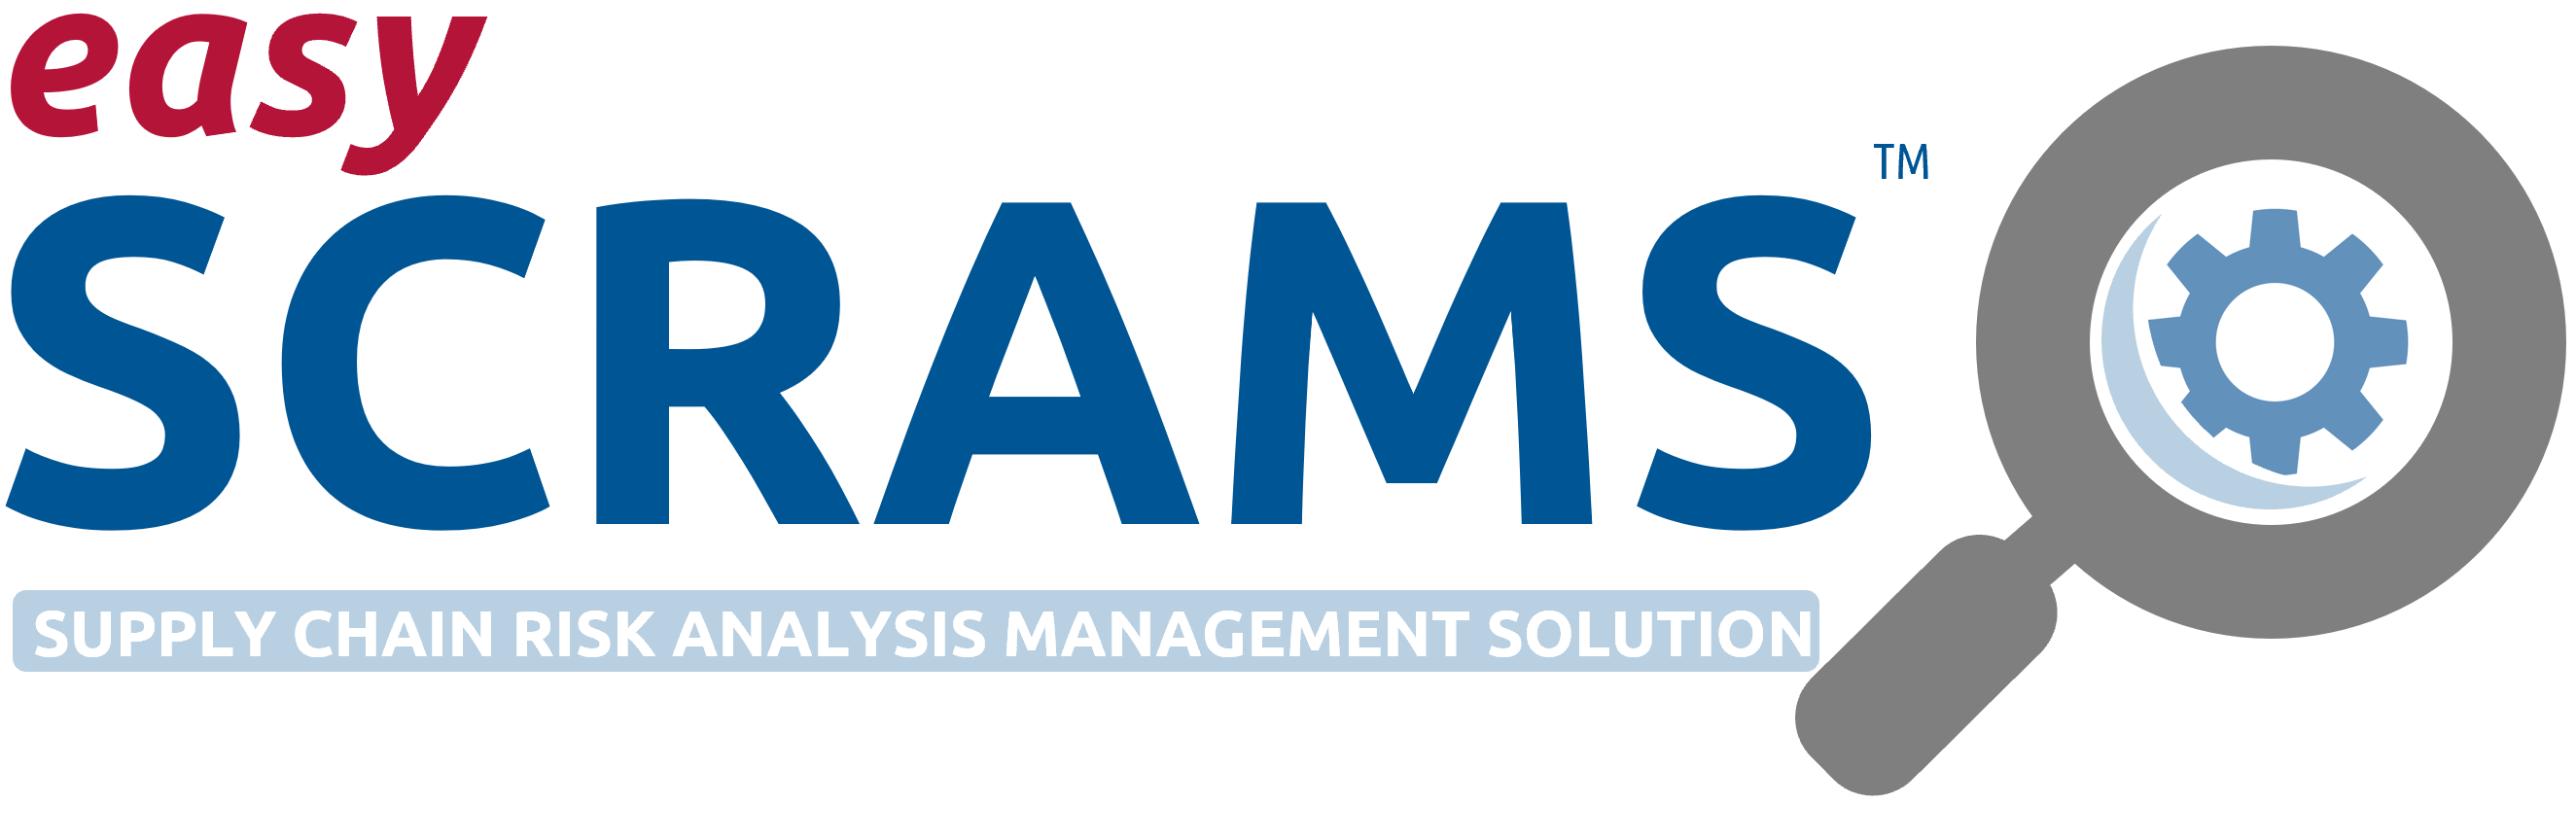 easy-SCRAMS login page - Supply Chain Risk Analysis Management System